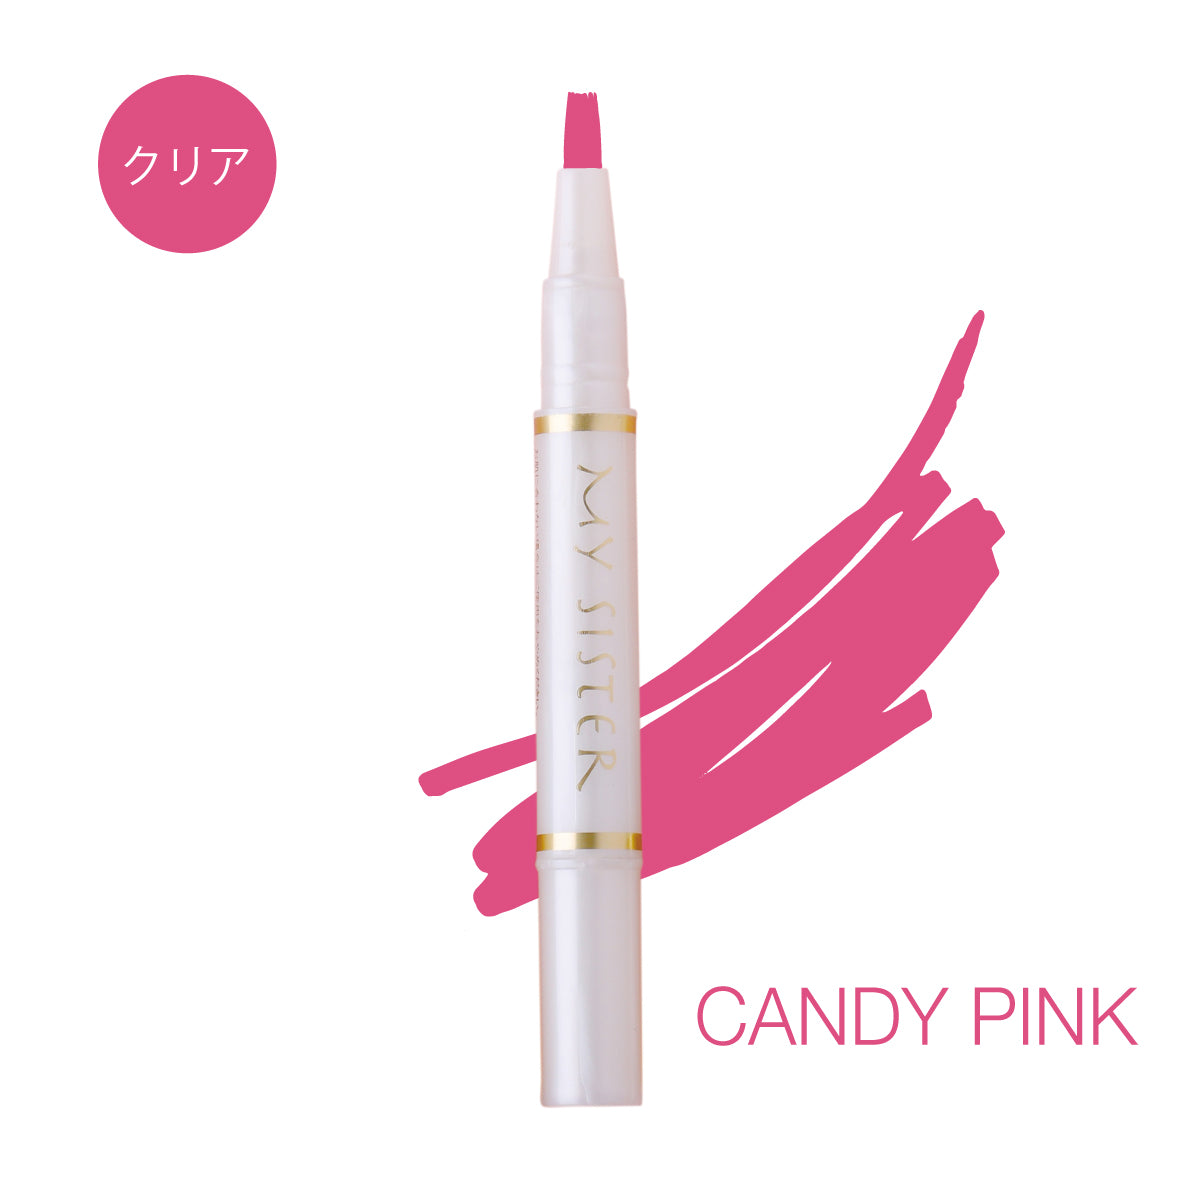 OC-05 CANDY PINK